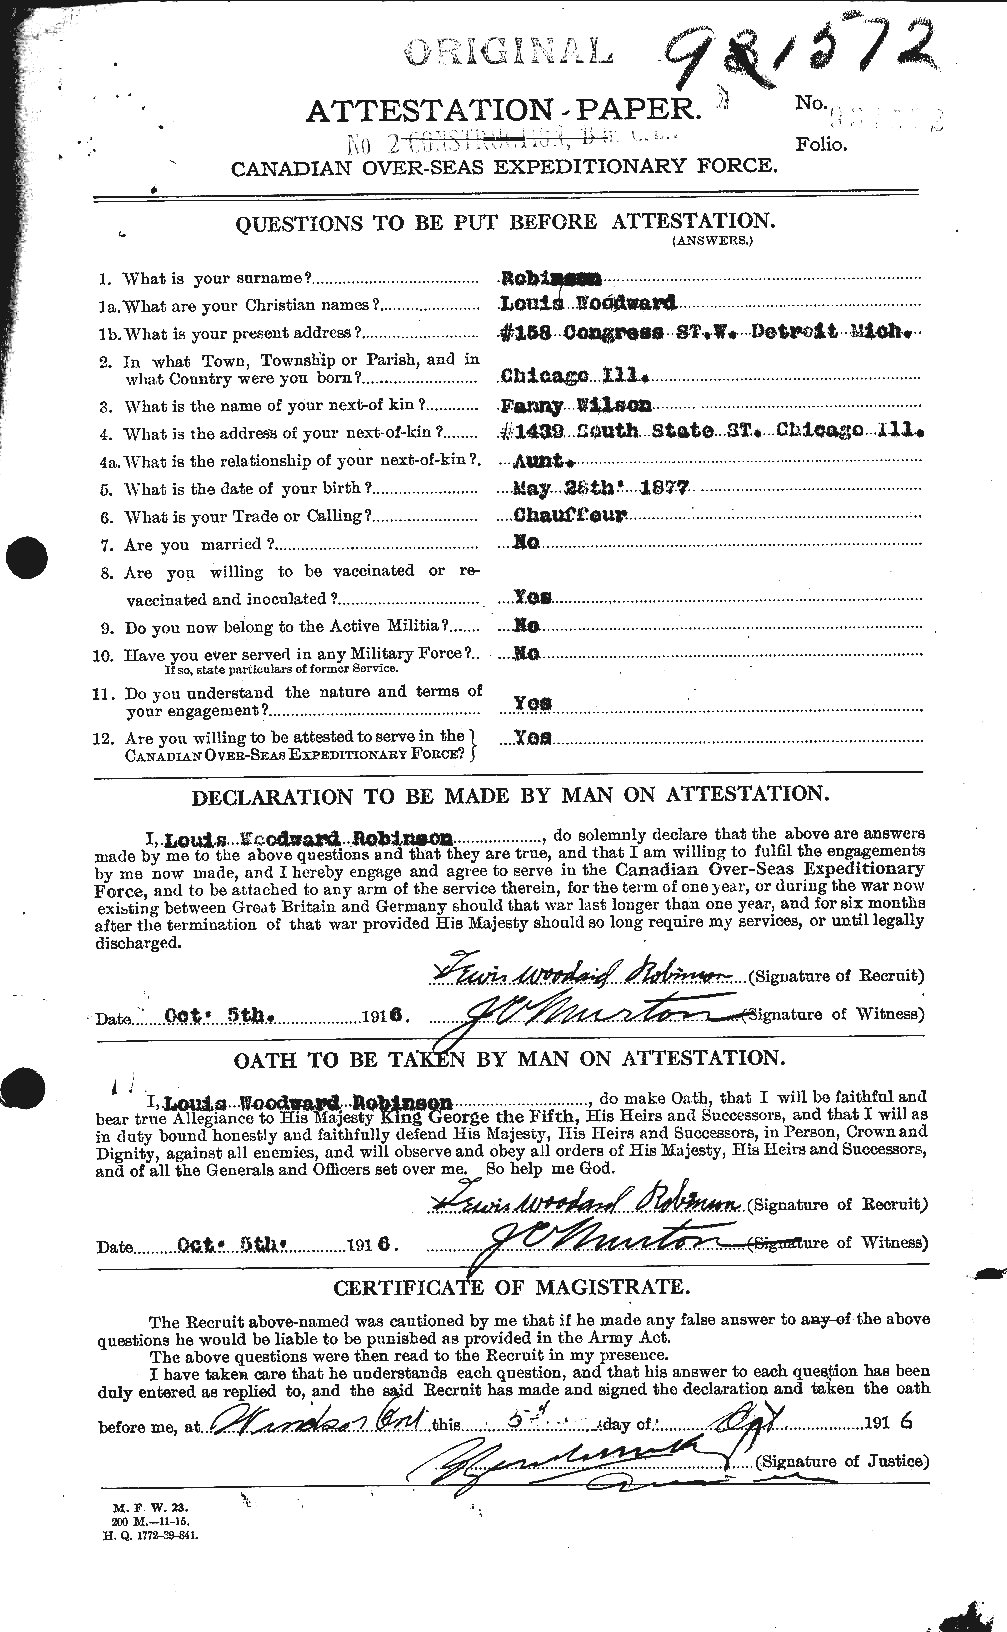 Personnel Records of the First World War - CEF 611658a